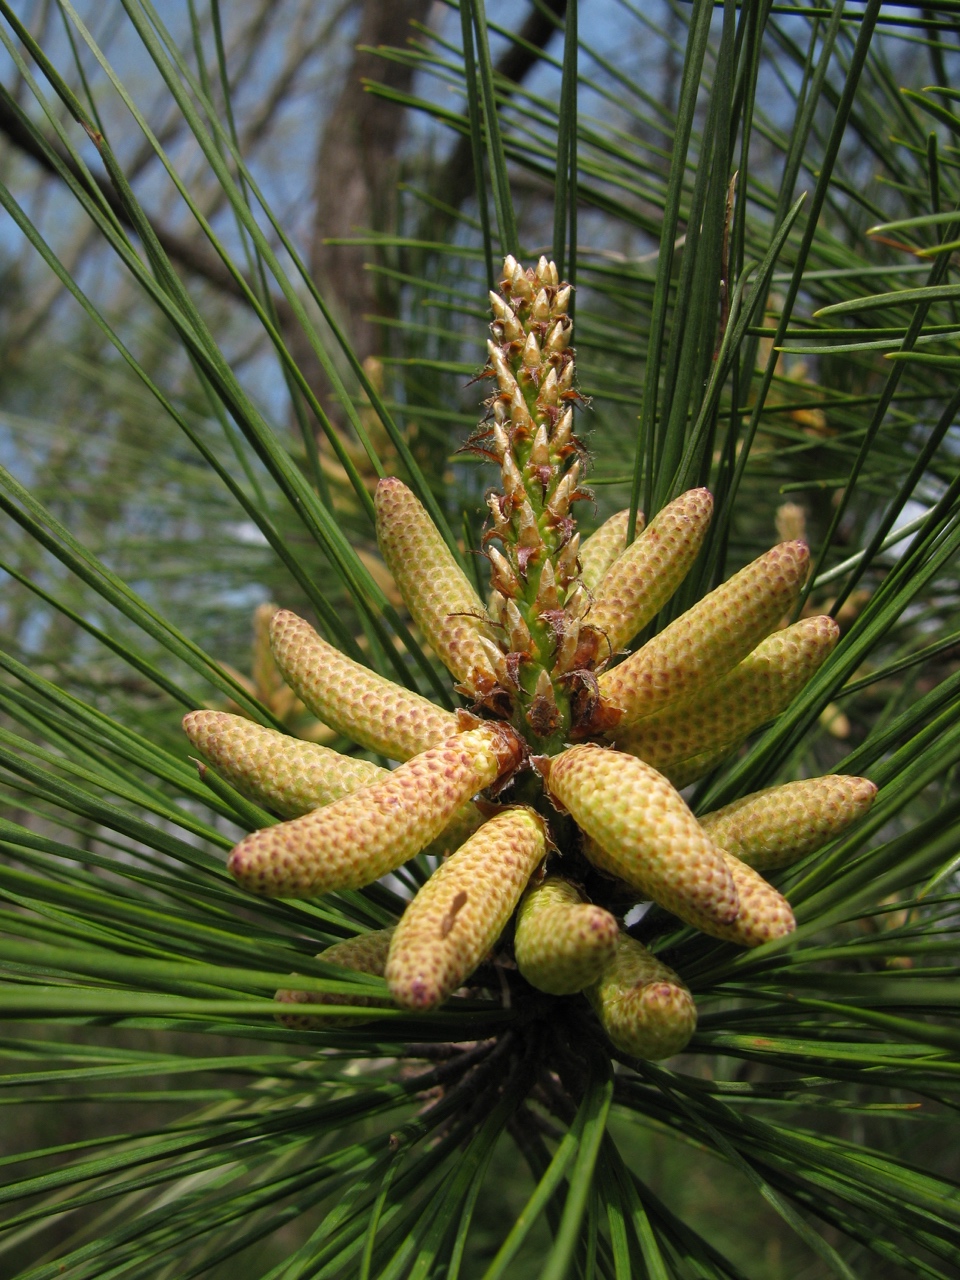 The Scientific Name is Pinus taeda. You will likely hear them called Loblolly Pine, Old Field Pine. This picture shows the Close-up of pollen cones in early April of Pinus taeda